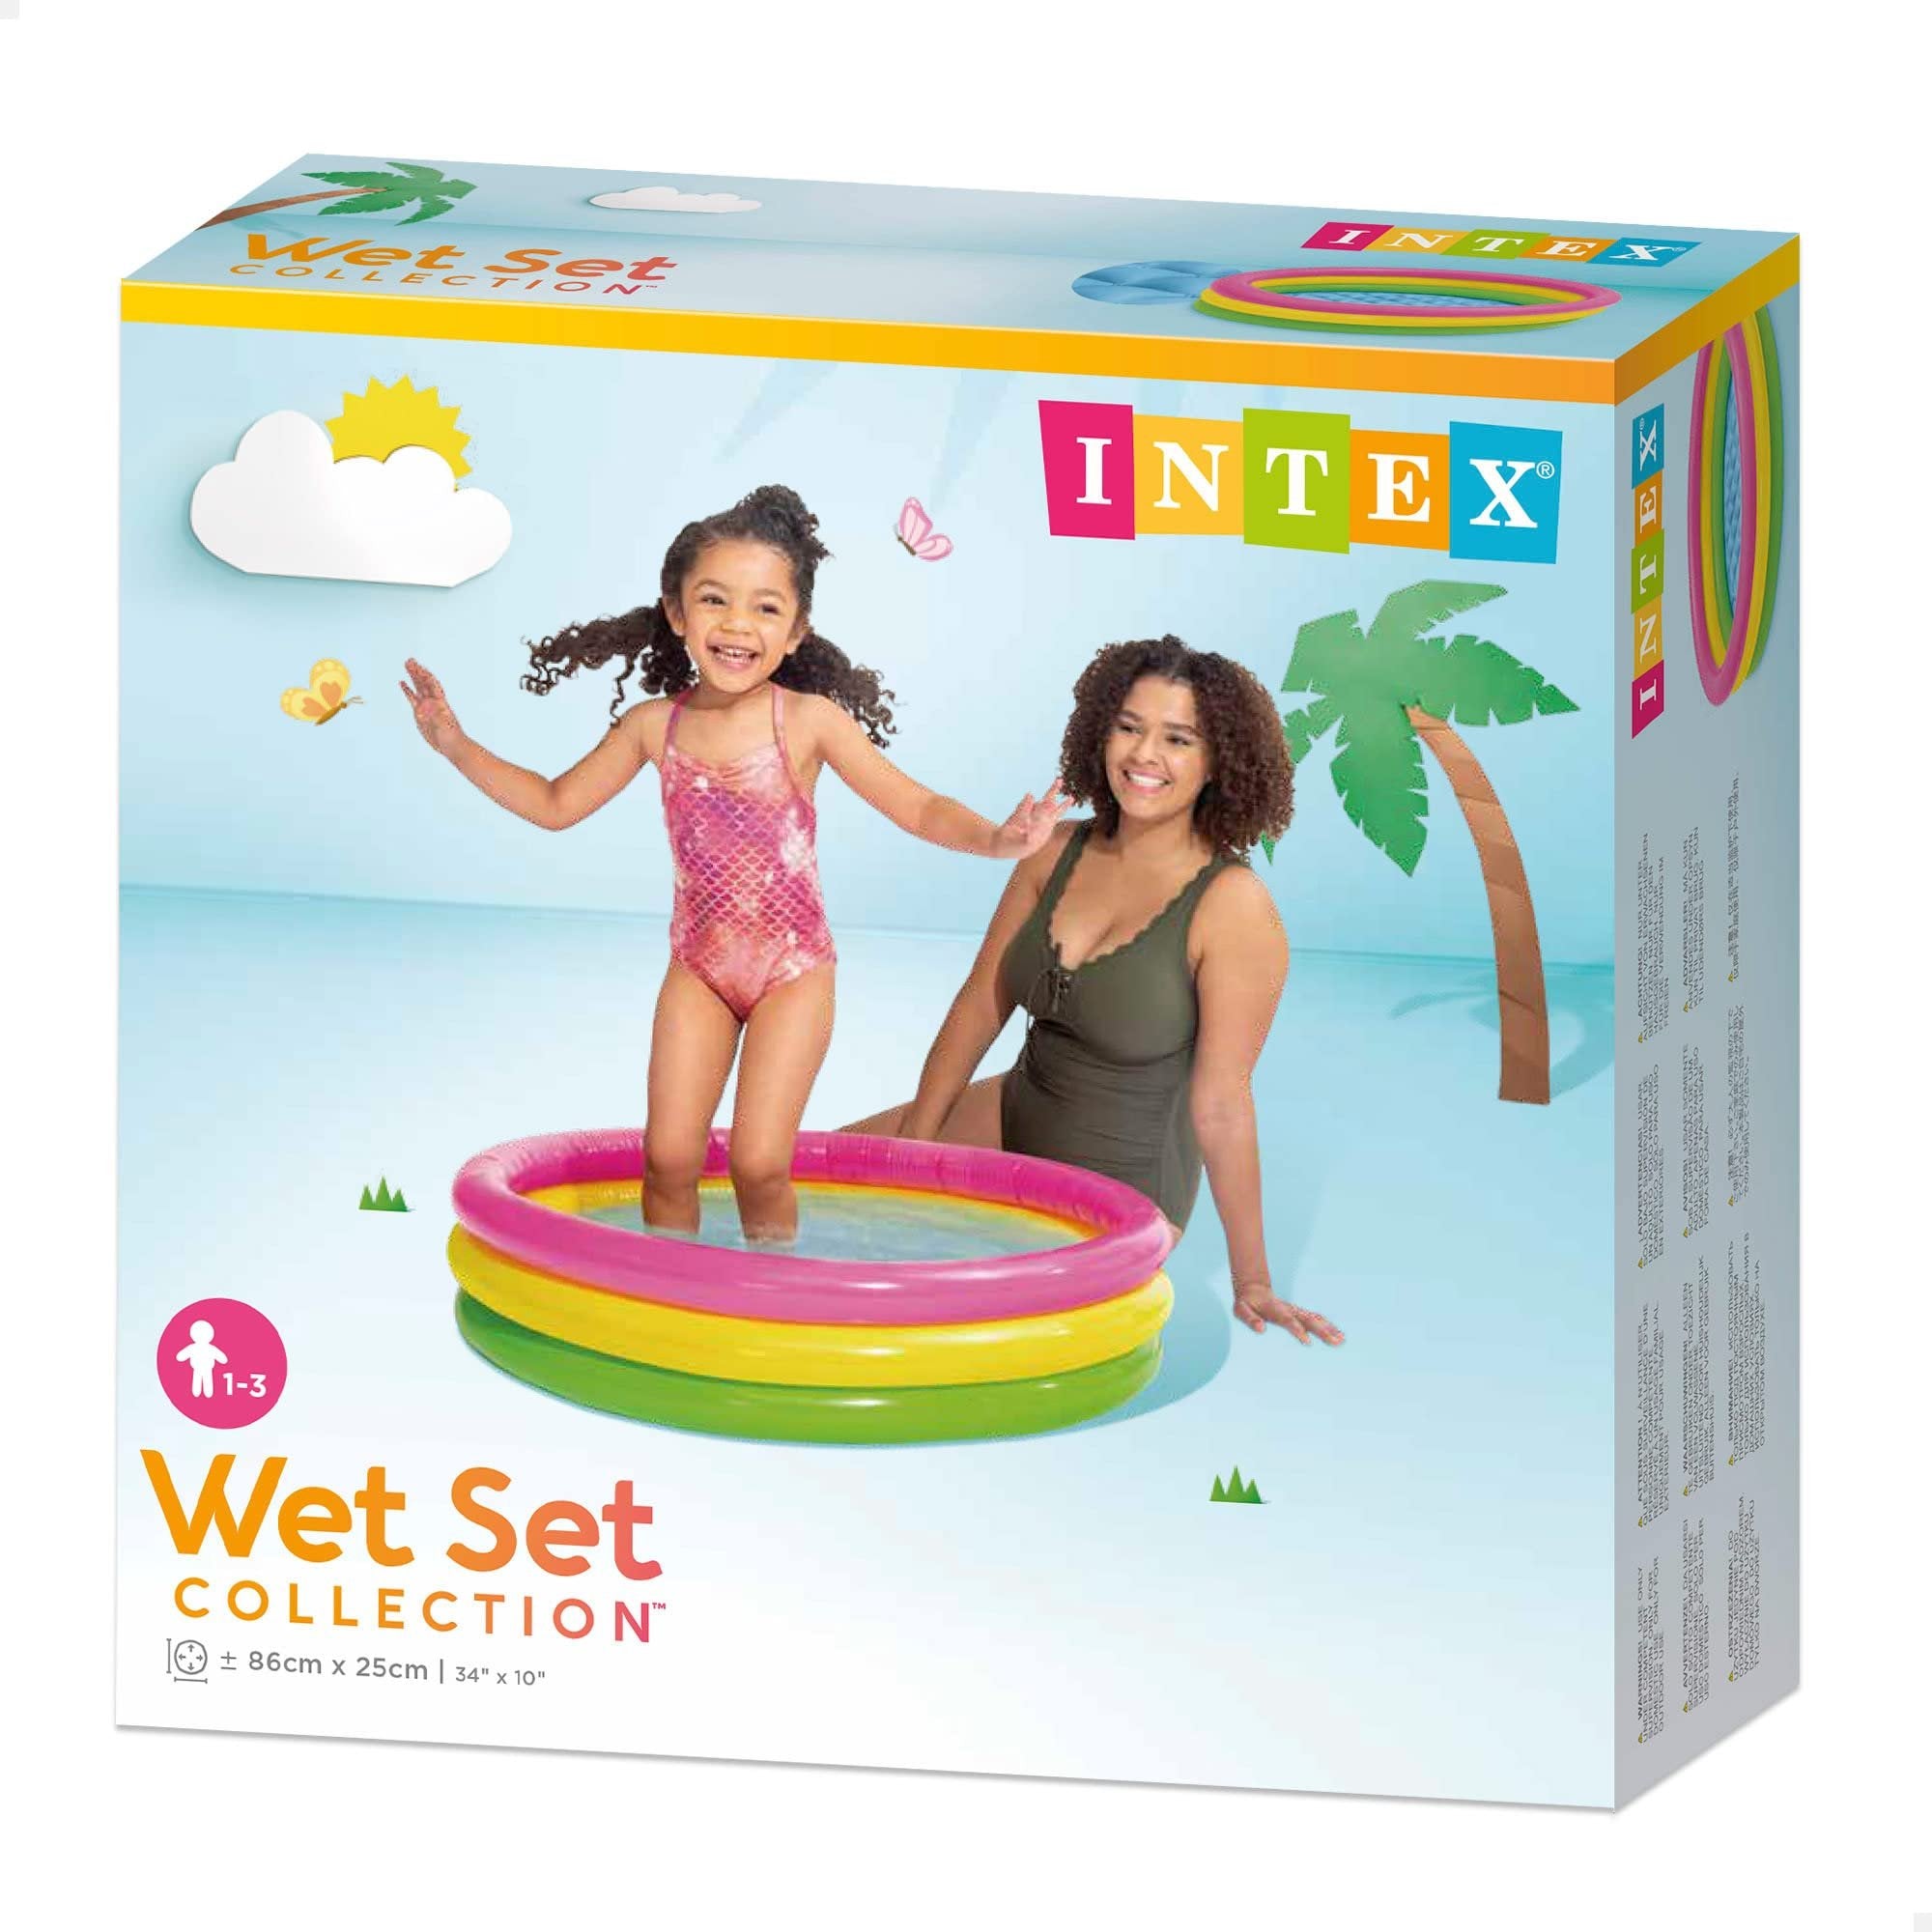 Intex Sunset Glow Baby Pool 34x10in Multicolor with Free Shipping & Returns